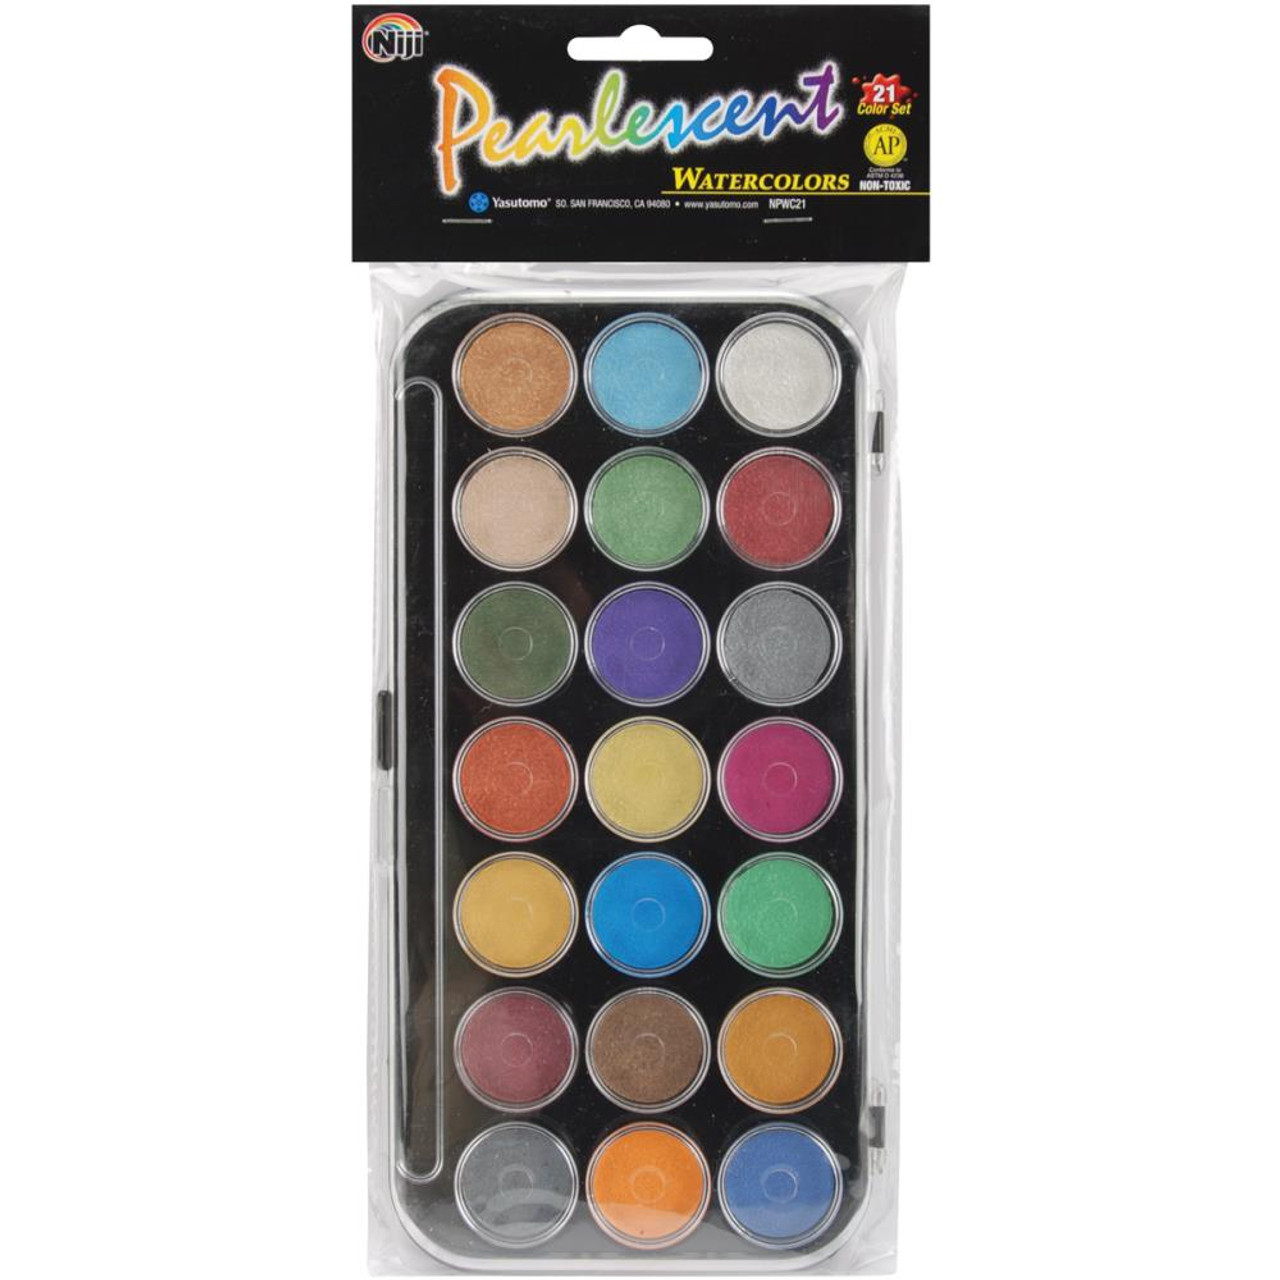 Yasutomo Pearlescent Watercolor Paint Cakes 21/Pkg Assorted Colors -  Scrapbooking Made Simple